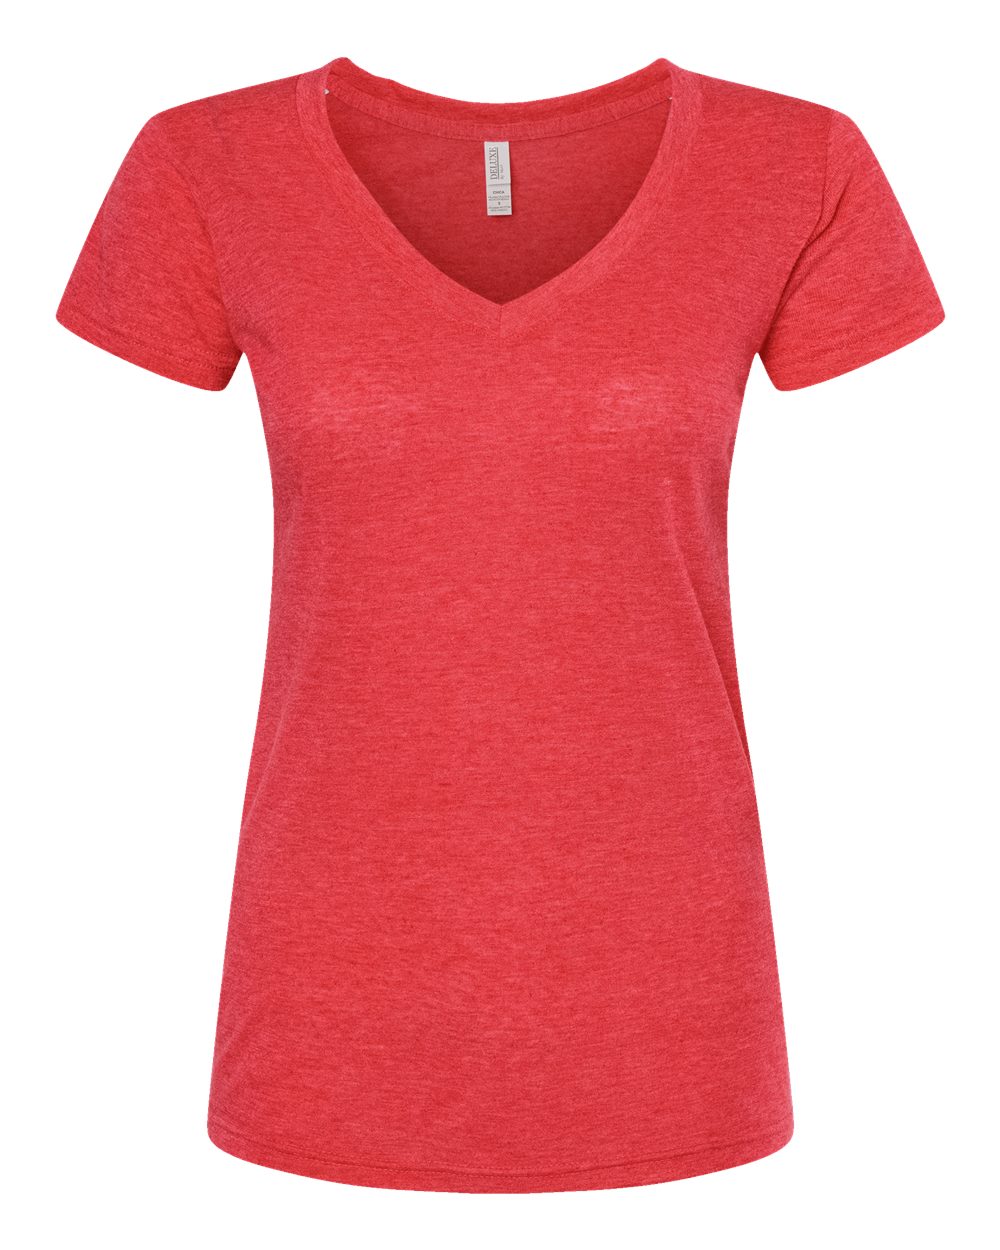 M&O Women's Deluxe Blend V-Neck T-Shirt 3542 #color_Heather Red